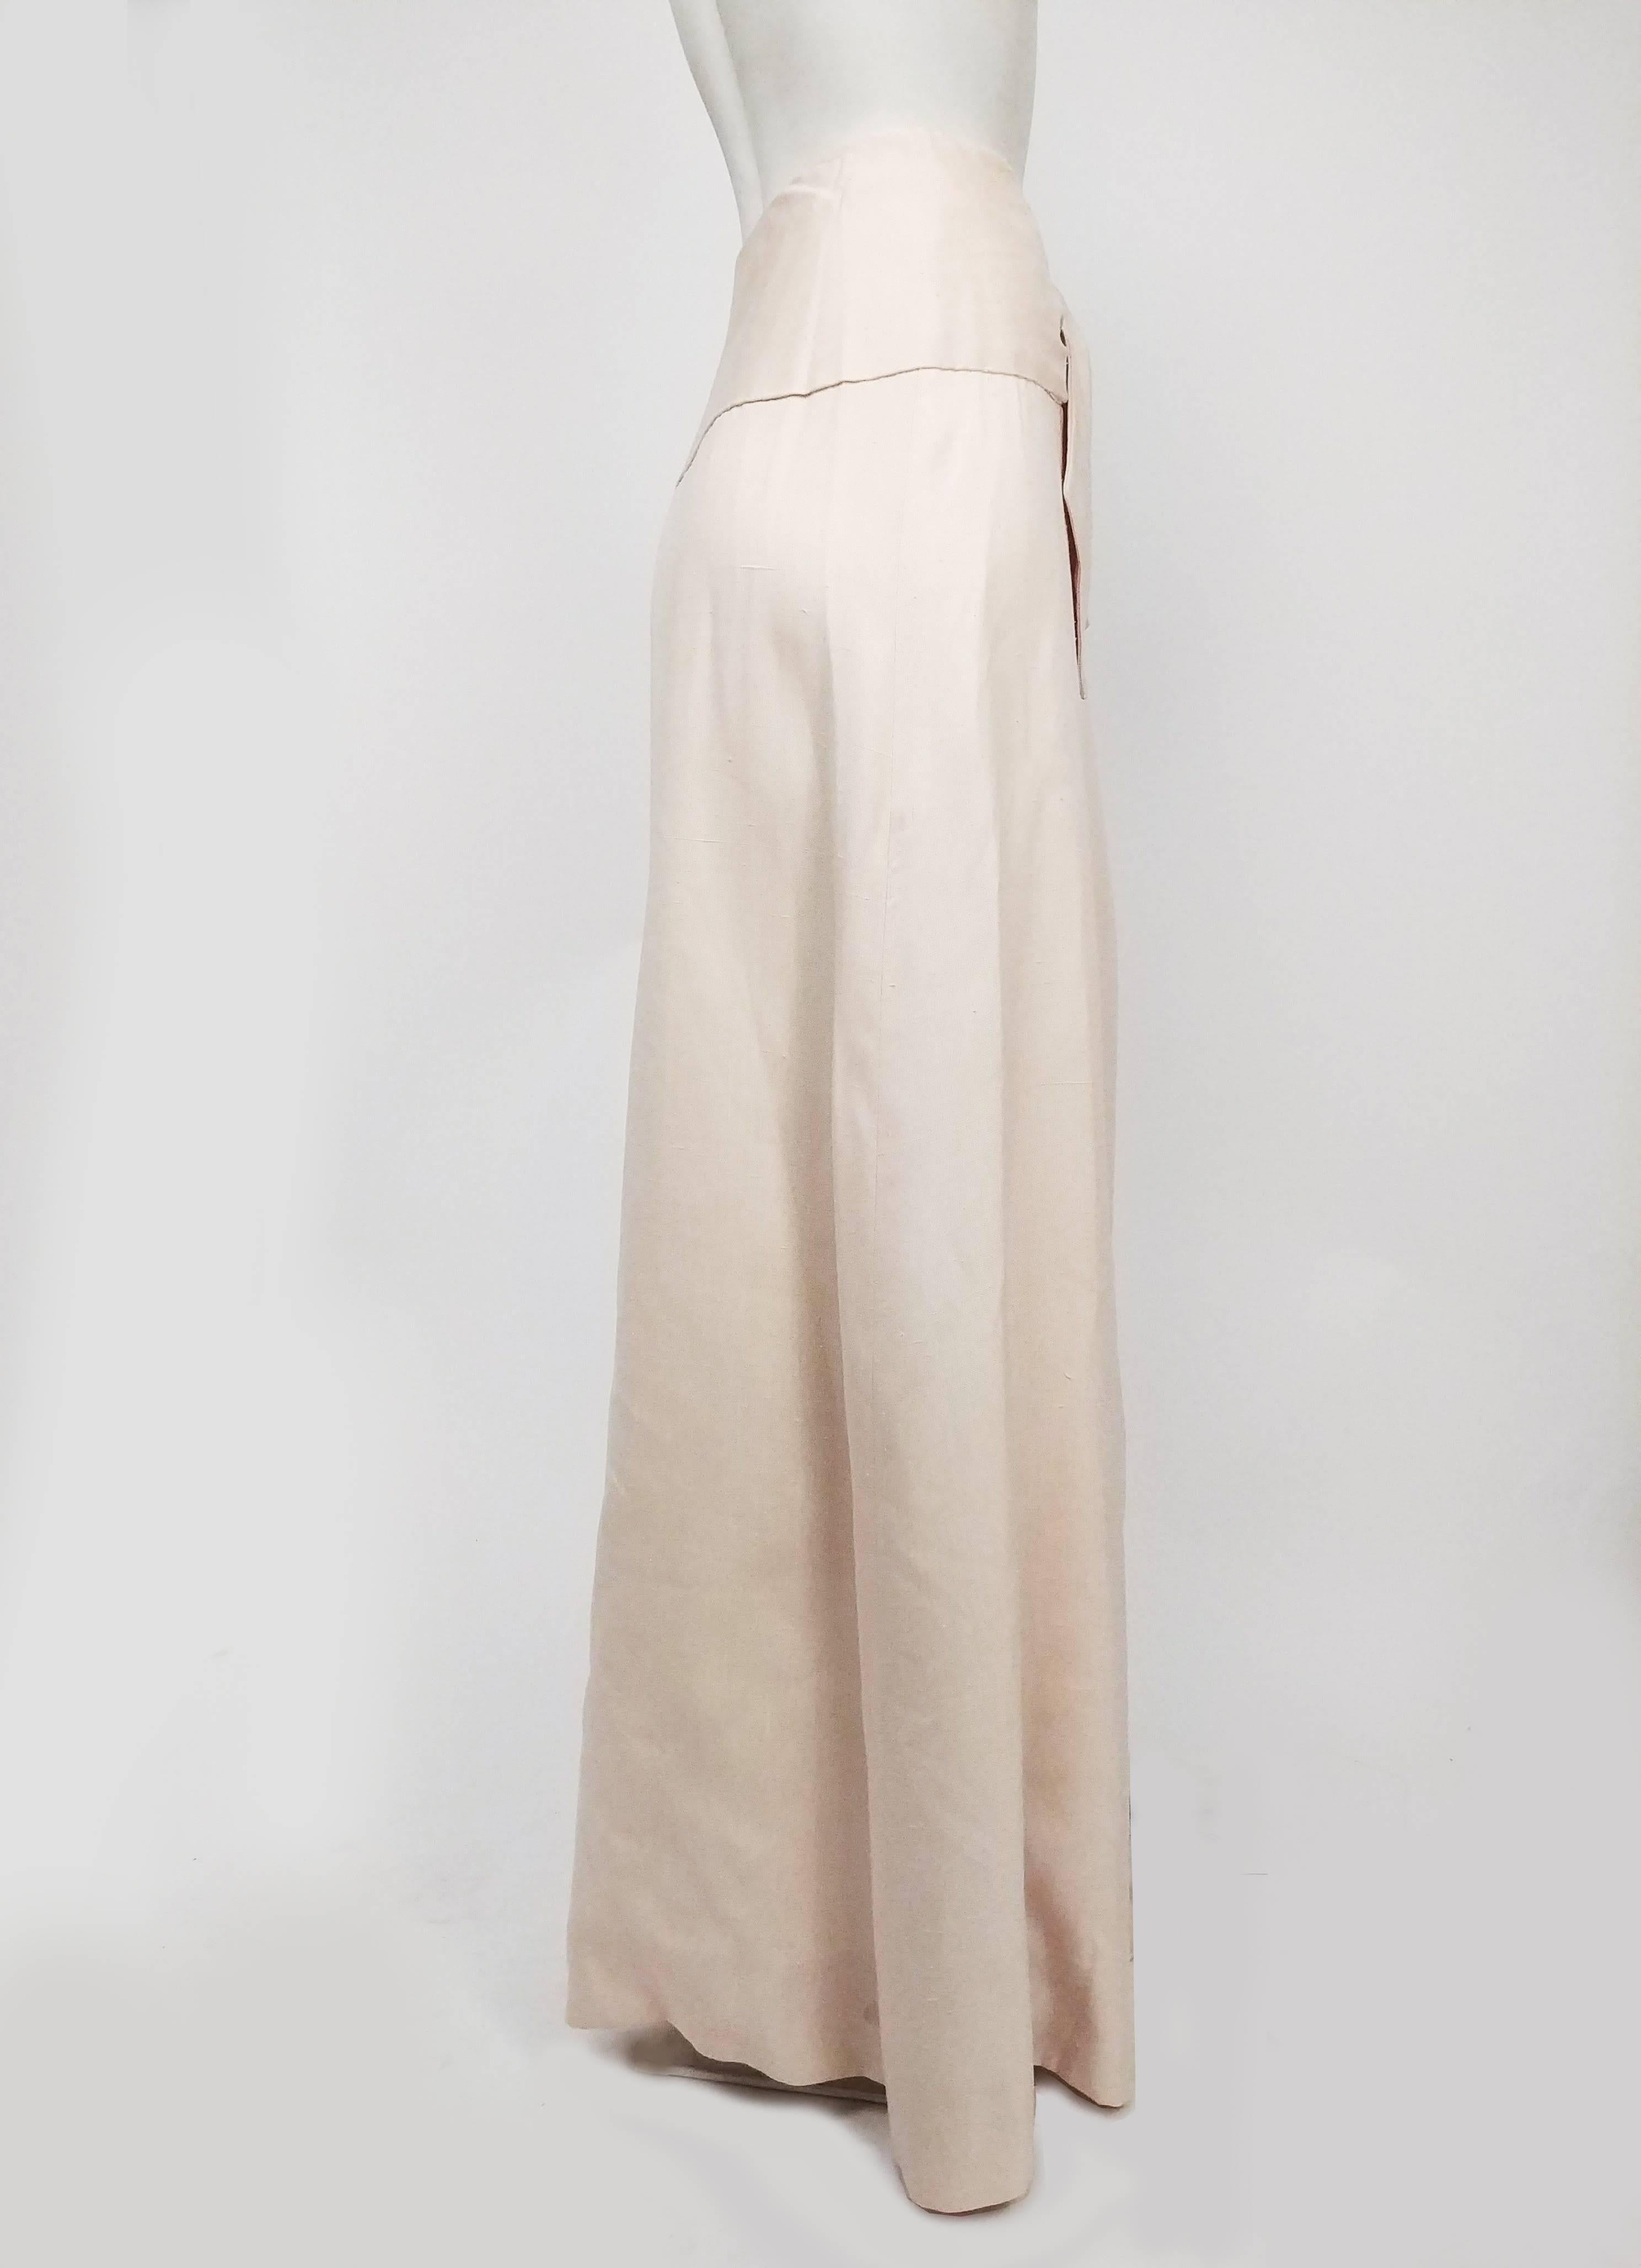 Halston Cream Linen Wraparound Maxi Skirt, 1970s. Cream linen skirt, ties at waist into bow at front, additional snaps at waistband for support. 